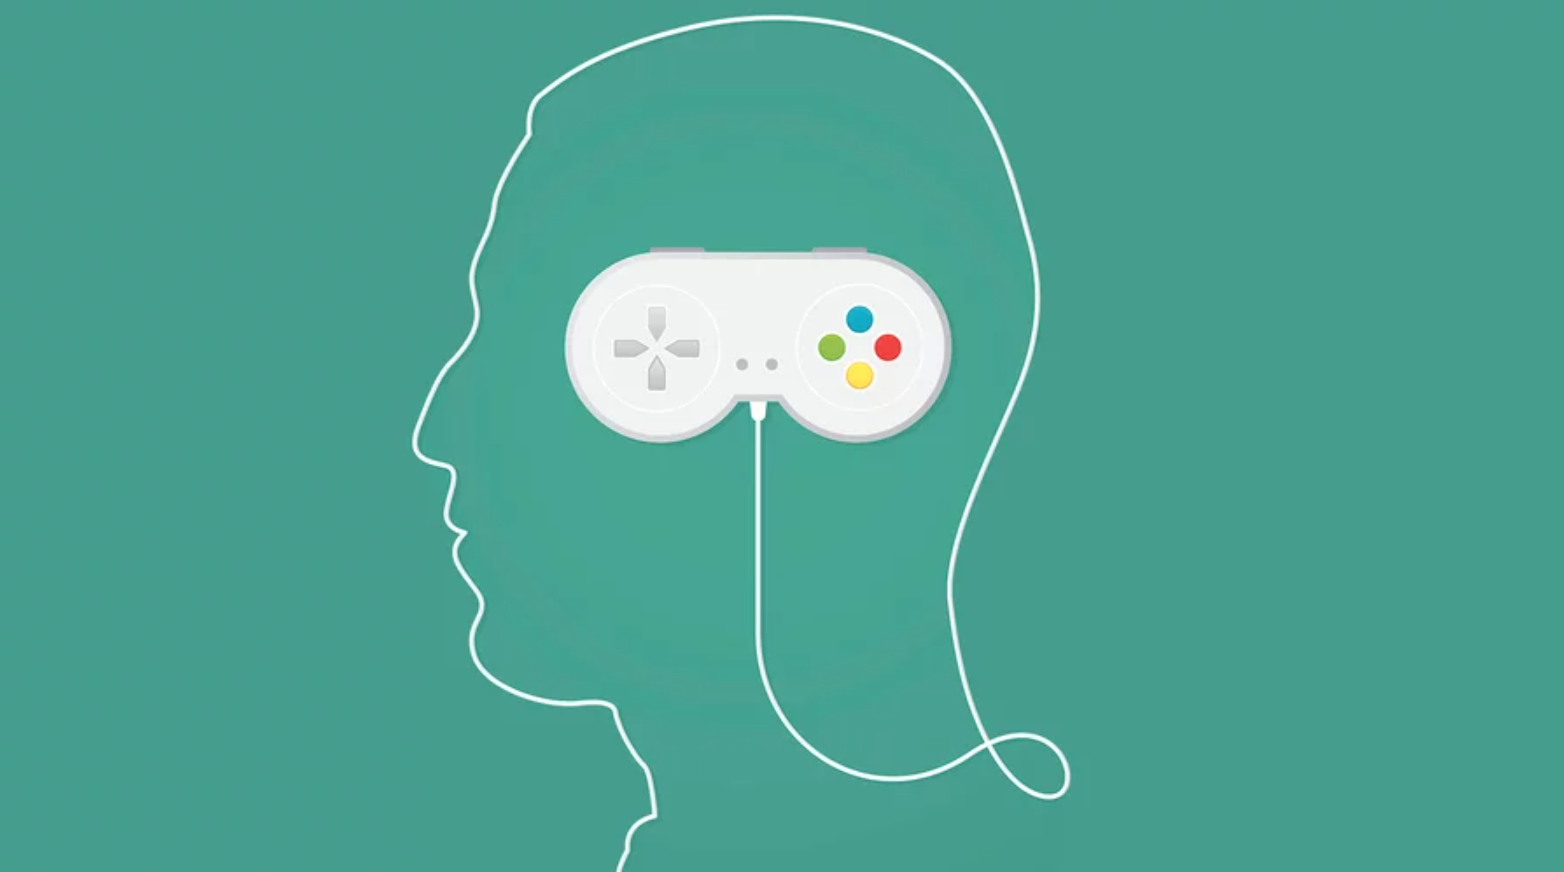 How Are Games Able to Pump the Human Brain?